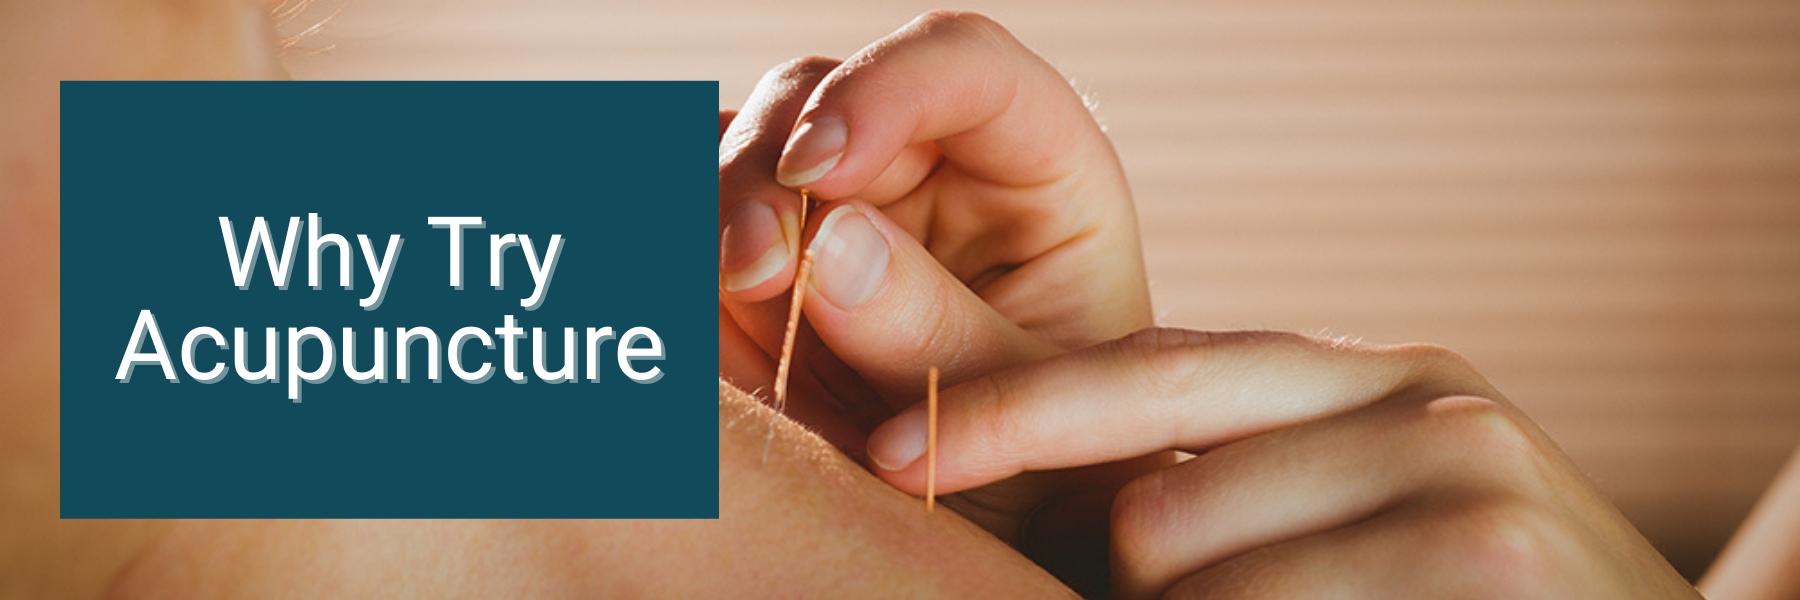 Why Try Acupuncture